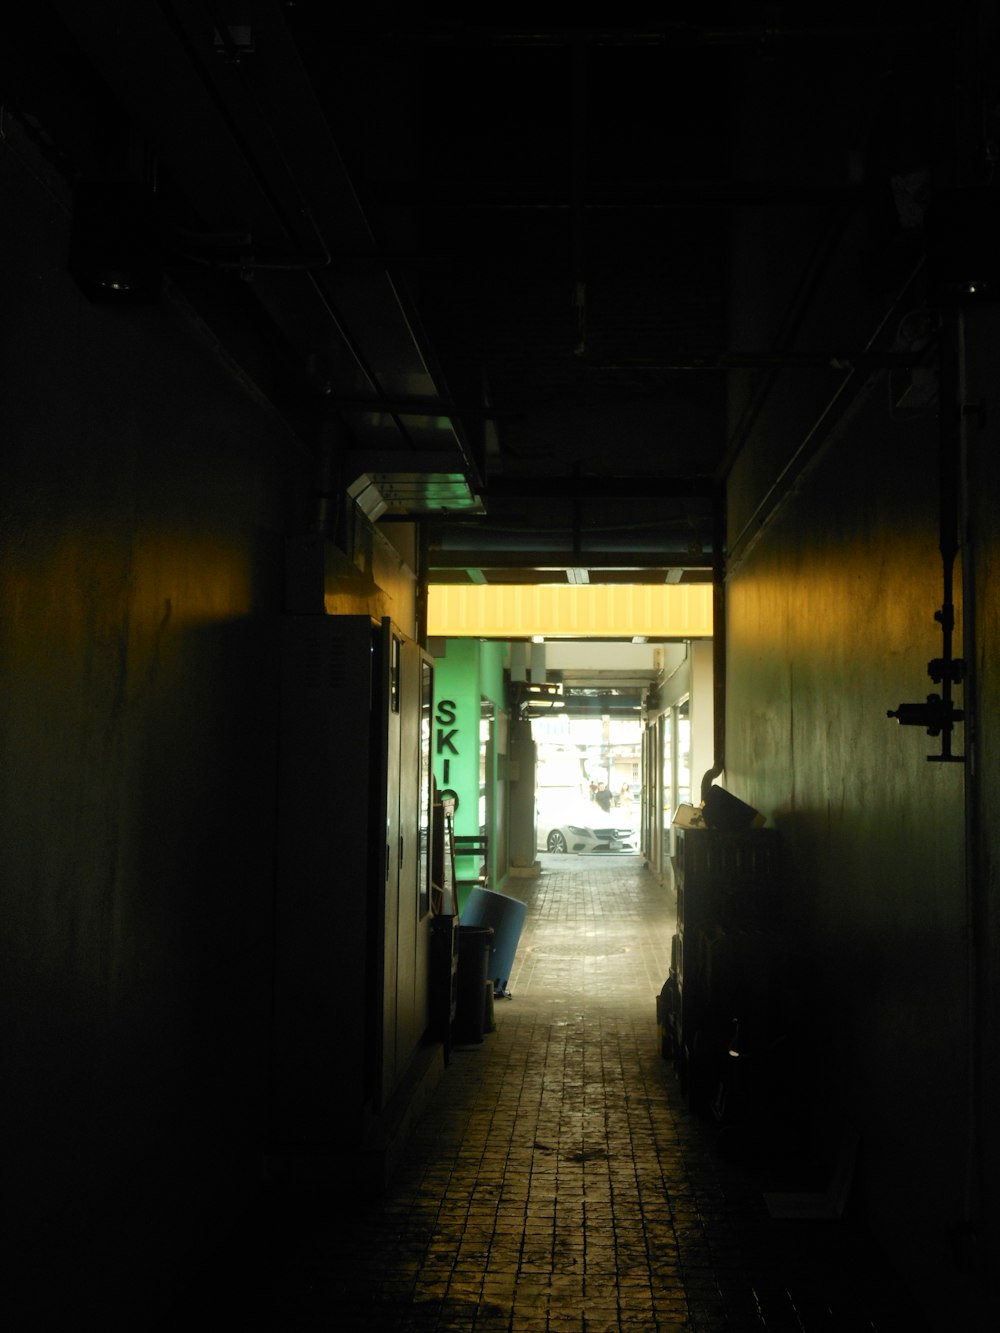 a dark hallway with a tiled floor and green walls